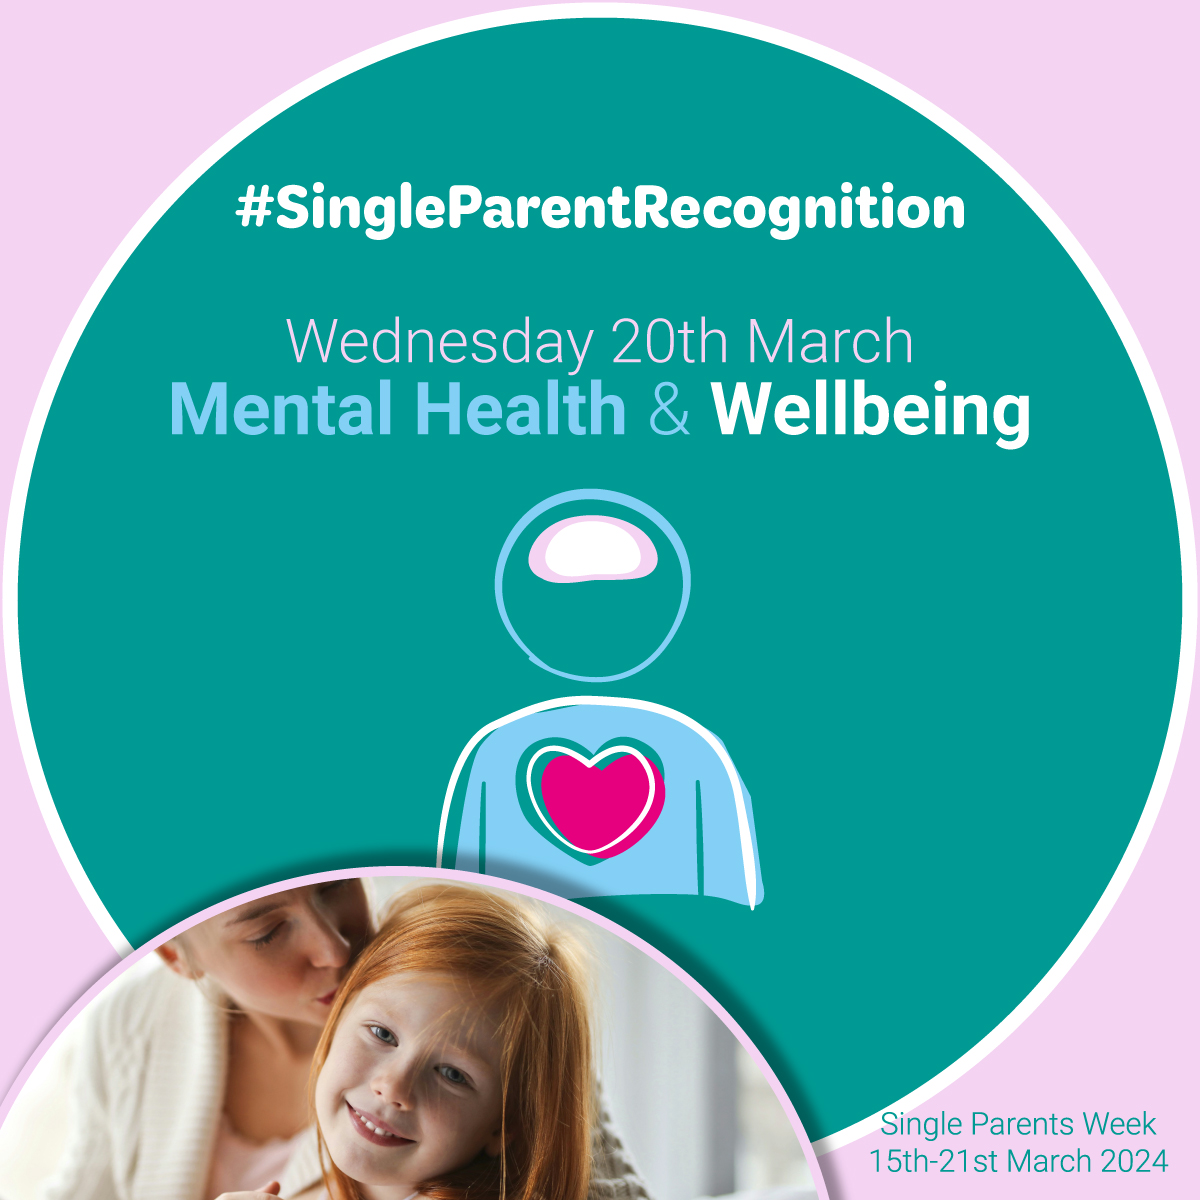 1/4 🤱Parents often reach out to us because they have little or no support systems around them. 💔Without a partner to share their worries, the sense of loneliness can be overwhelming. #SingleParentsWeek